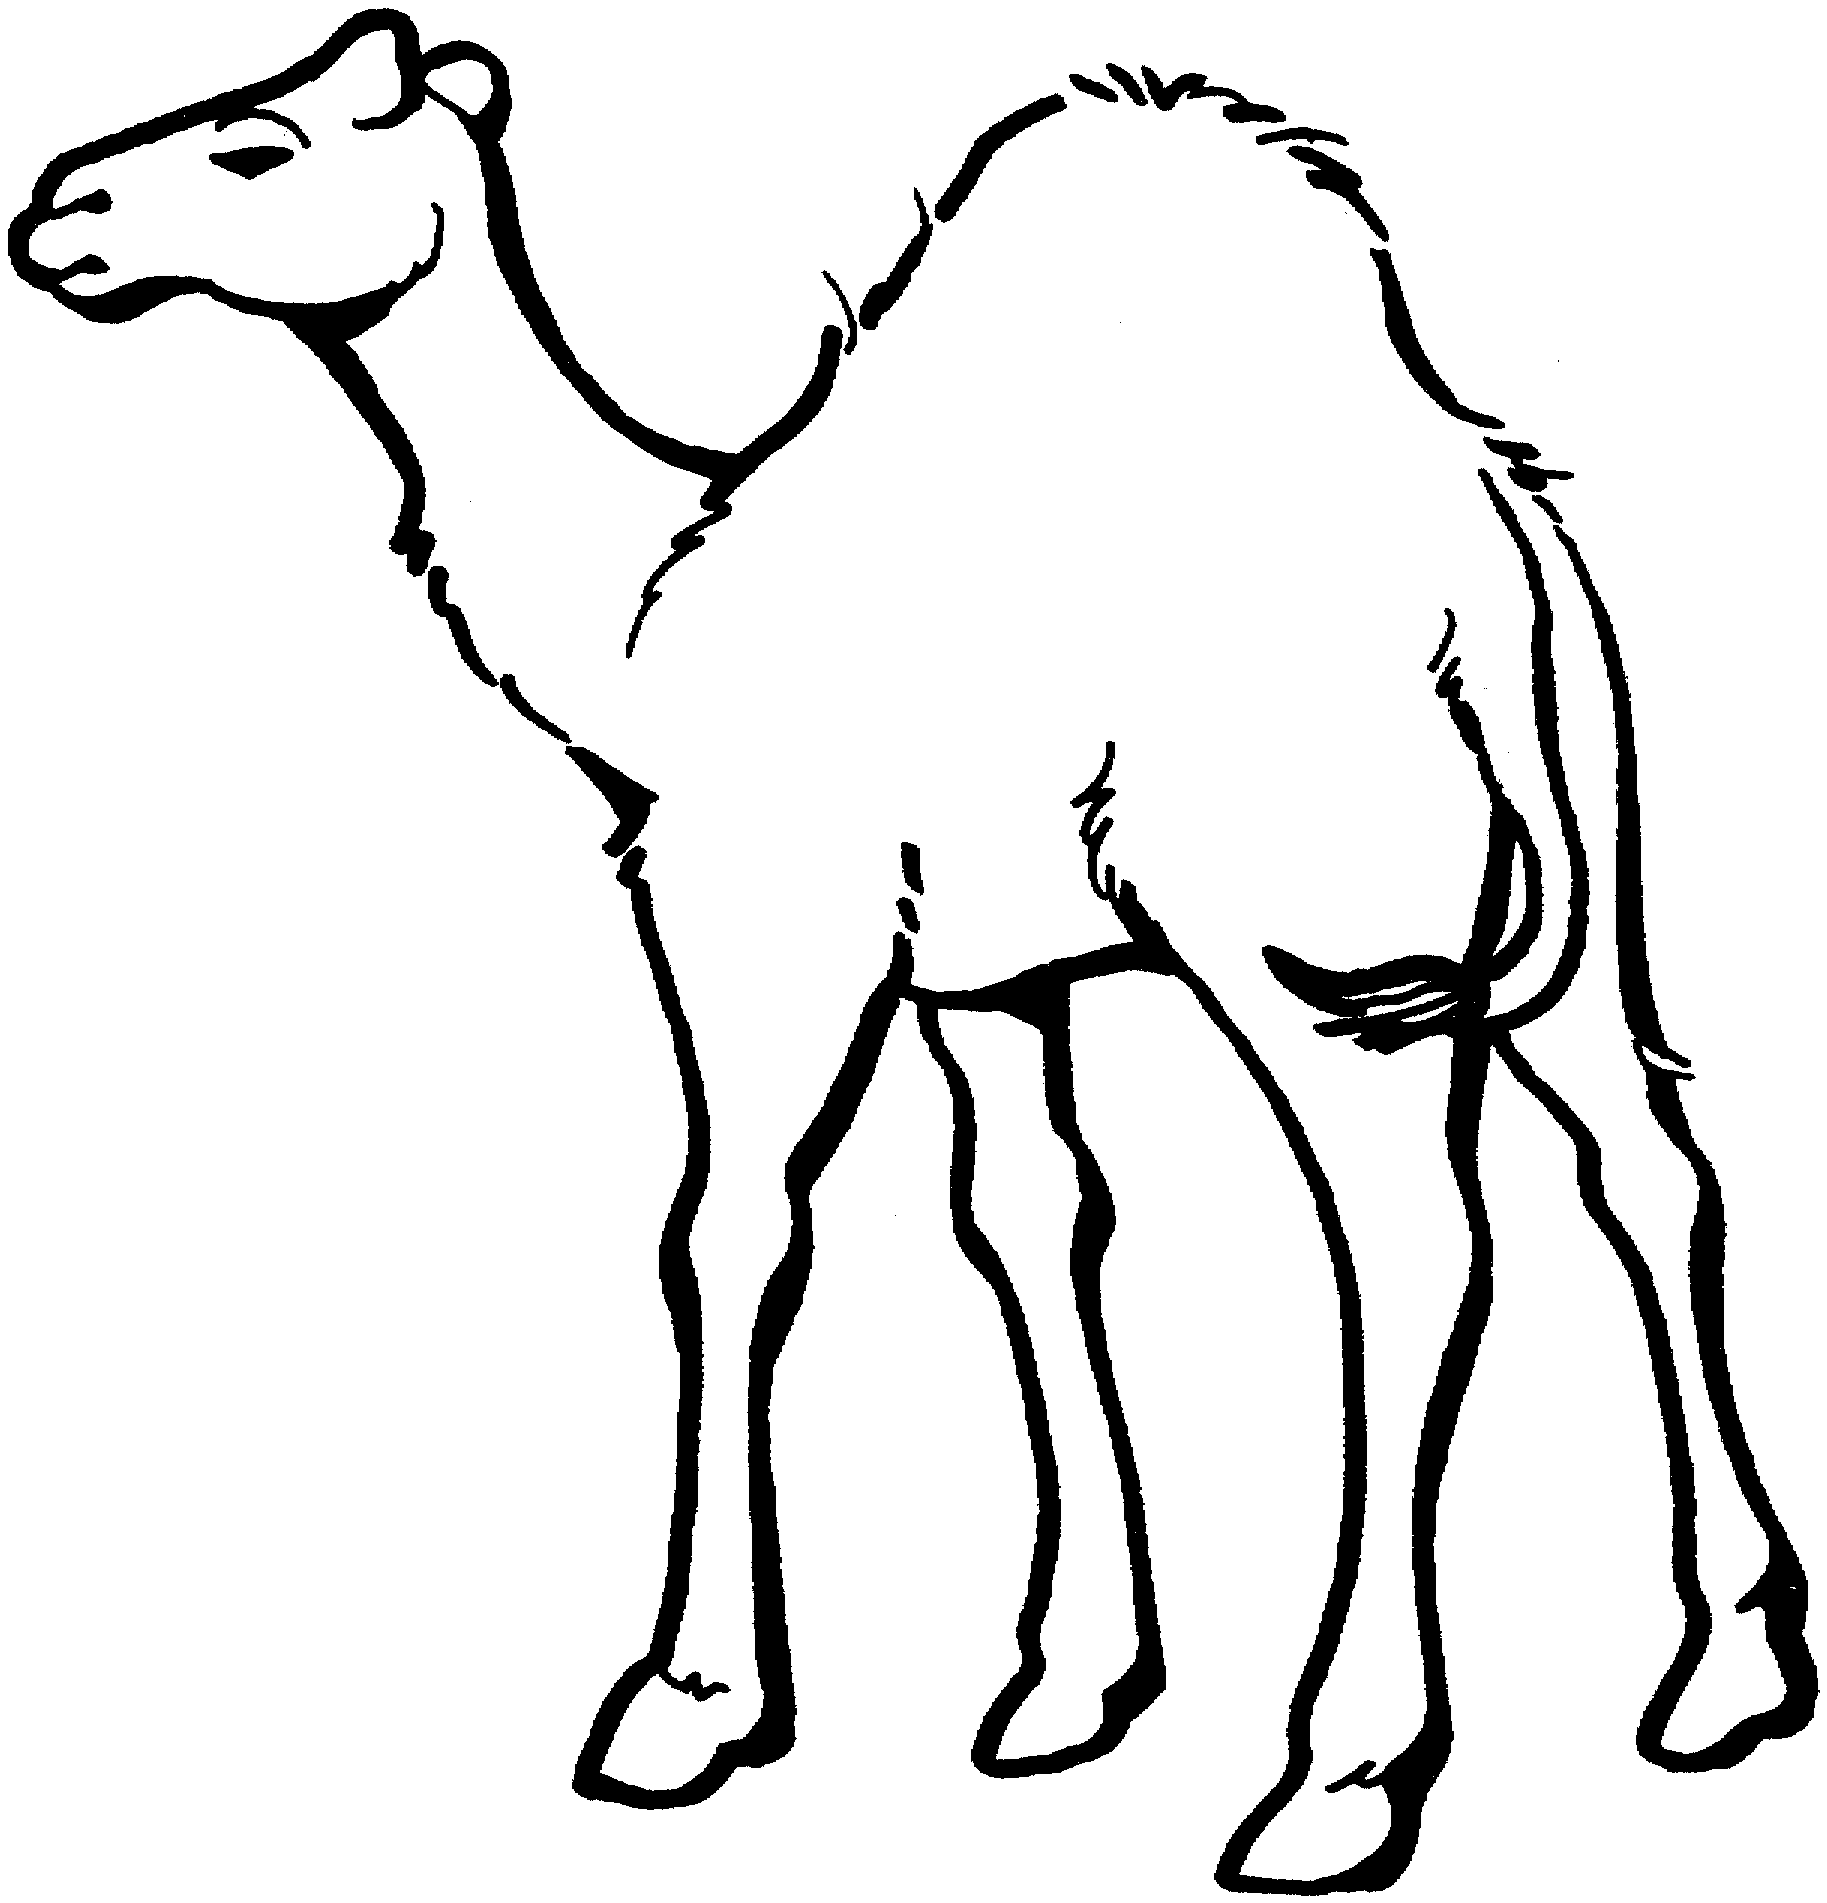 Easy camel drawing.